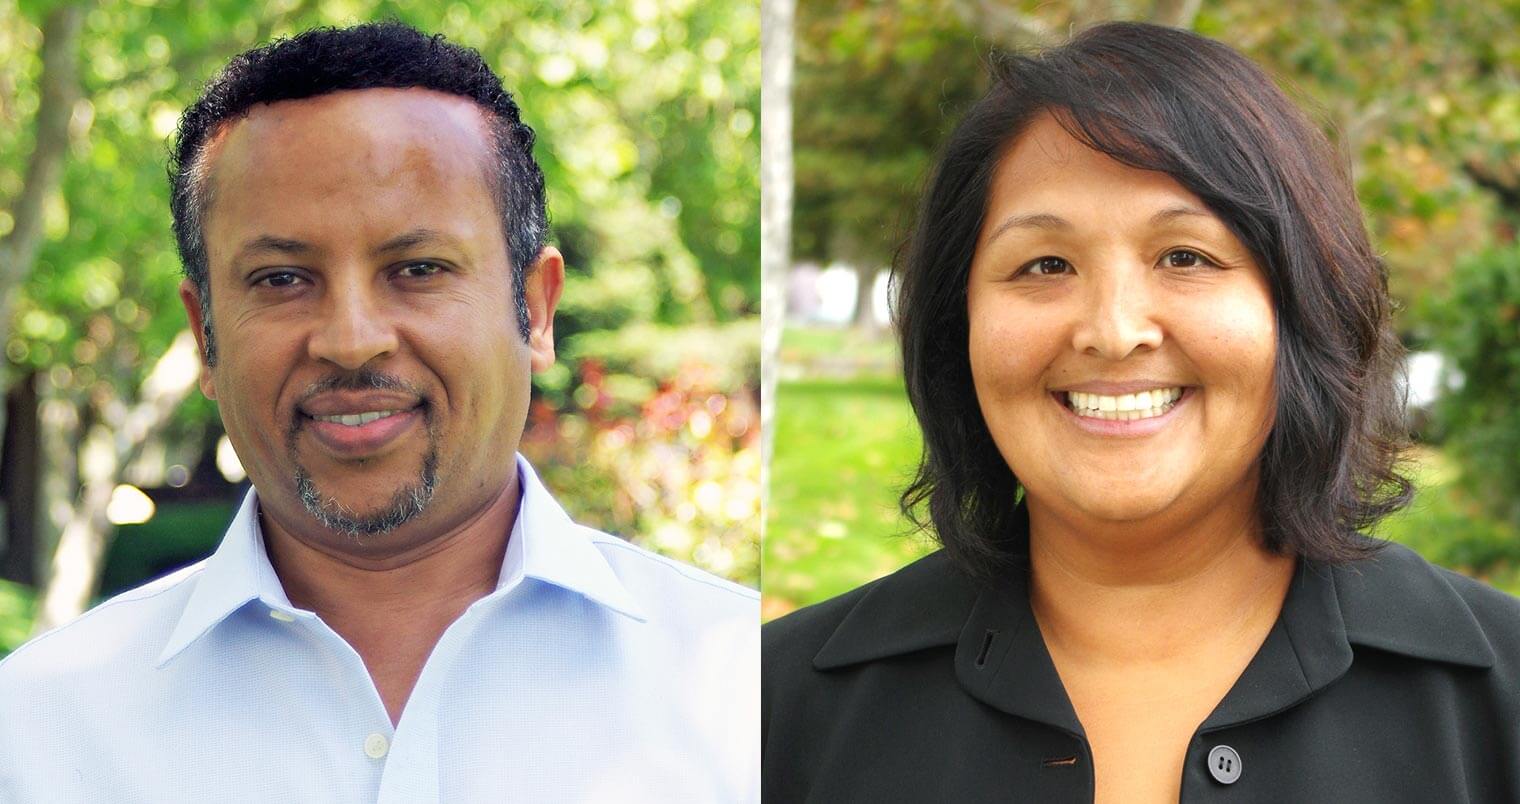 The Perfect Purée of Napa Valley Promotes Michele Lex and Medhane Kidane to Co-President, featured image